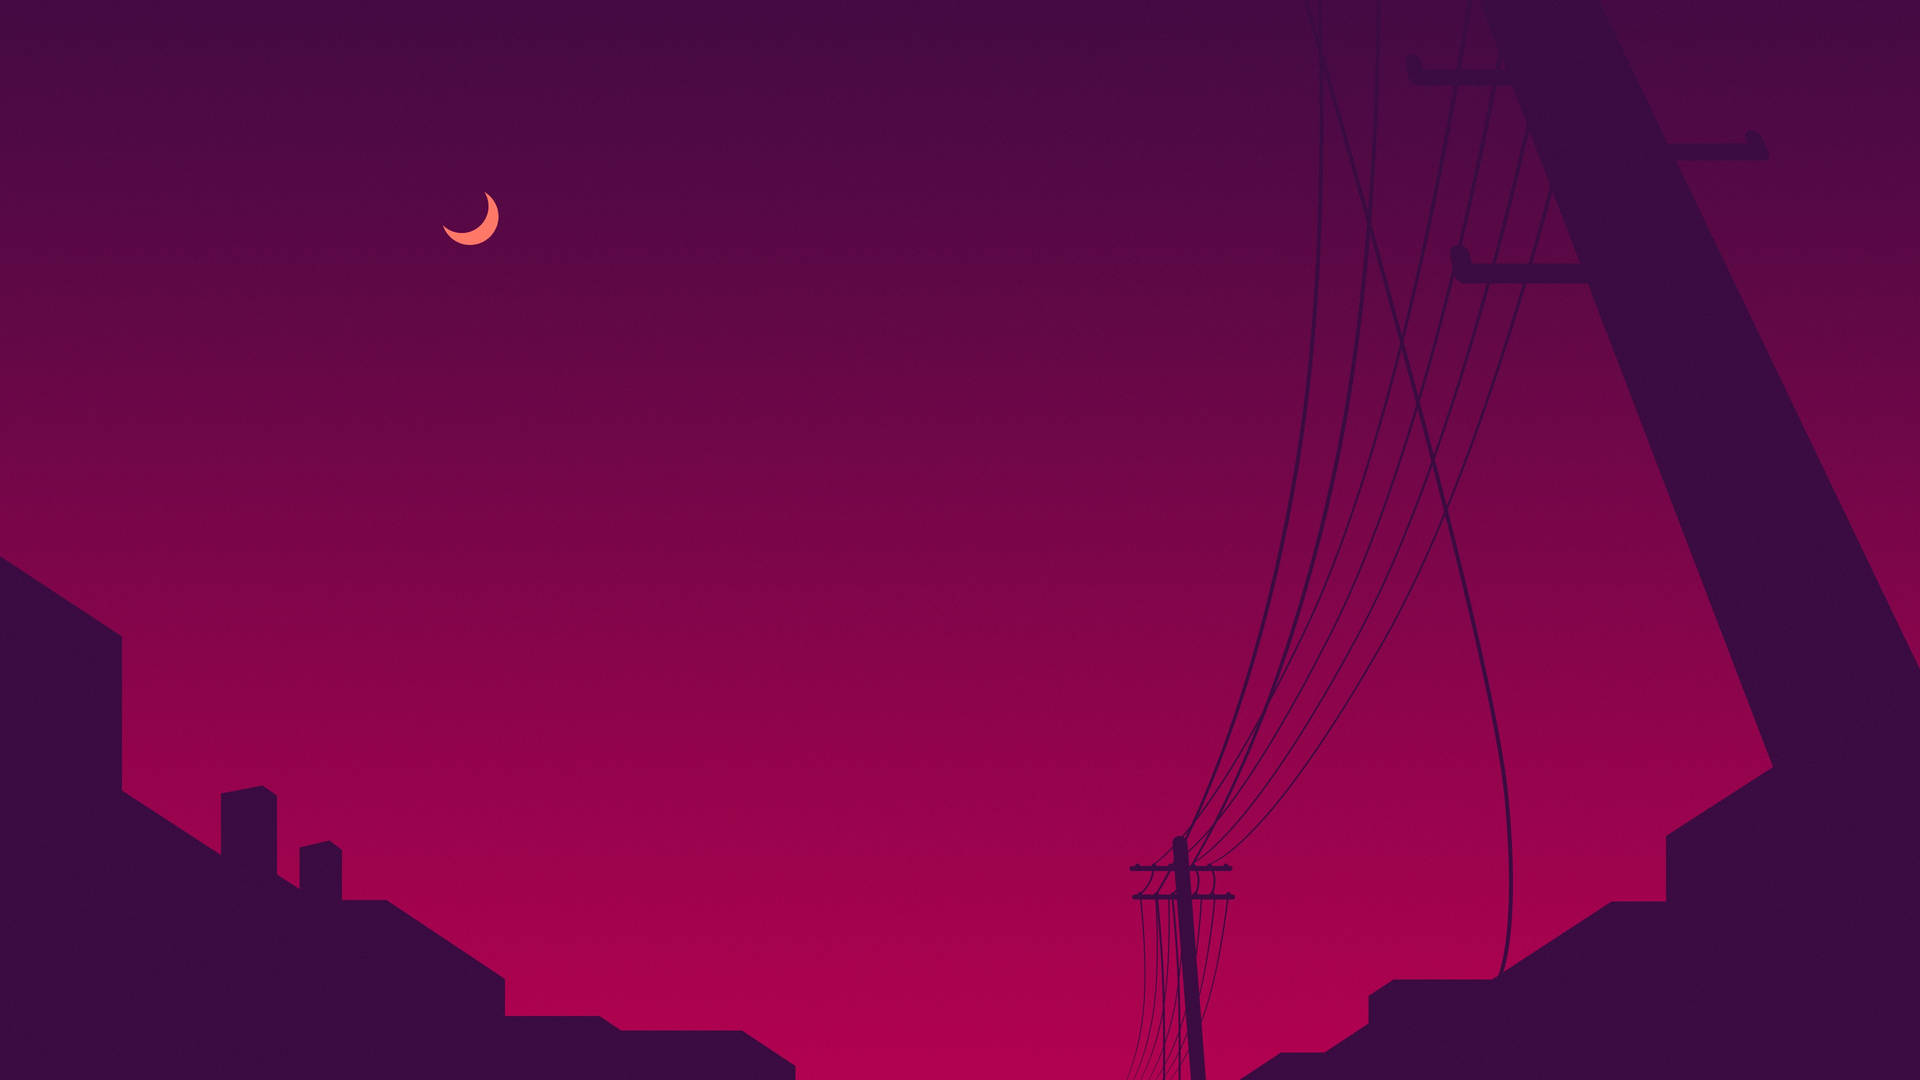 Aesthetic Moon Above The Power Lines Background